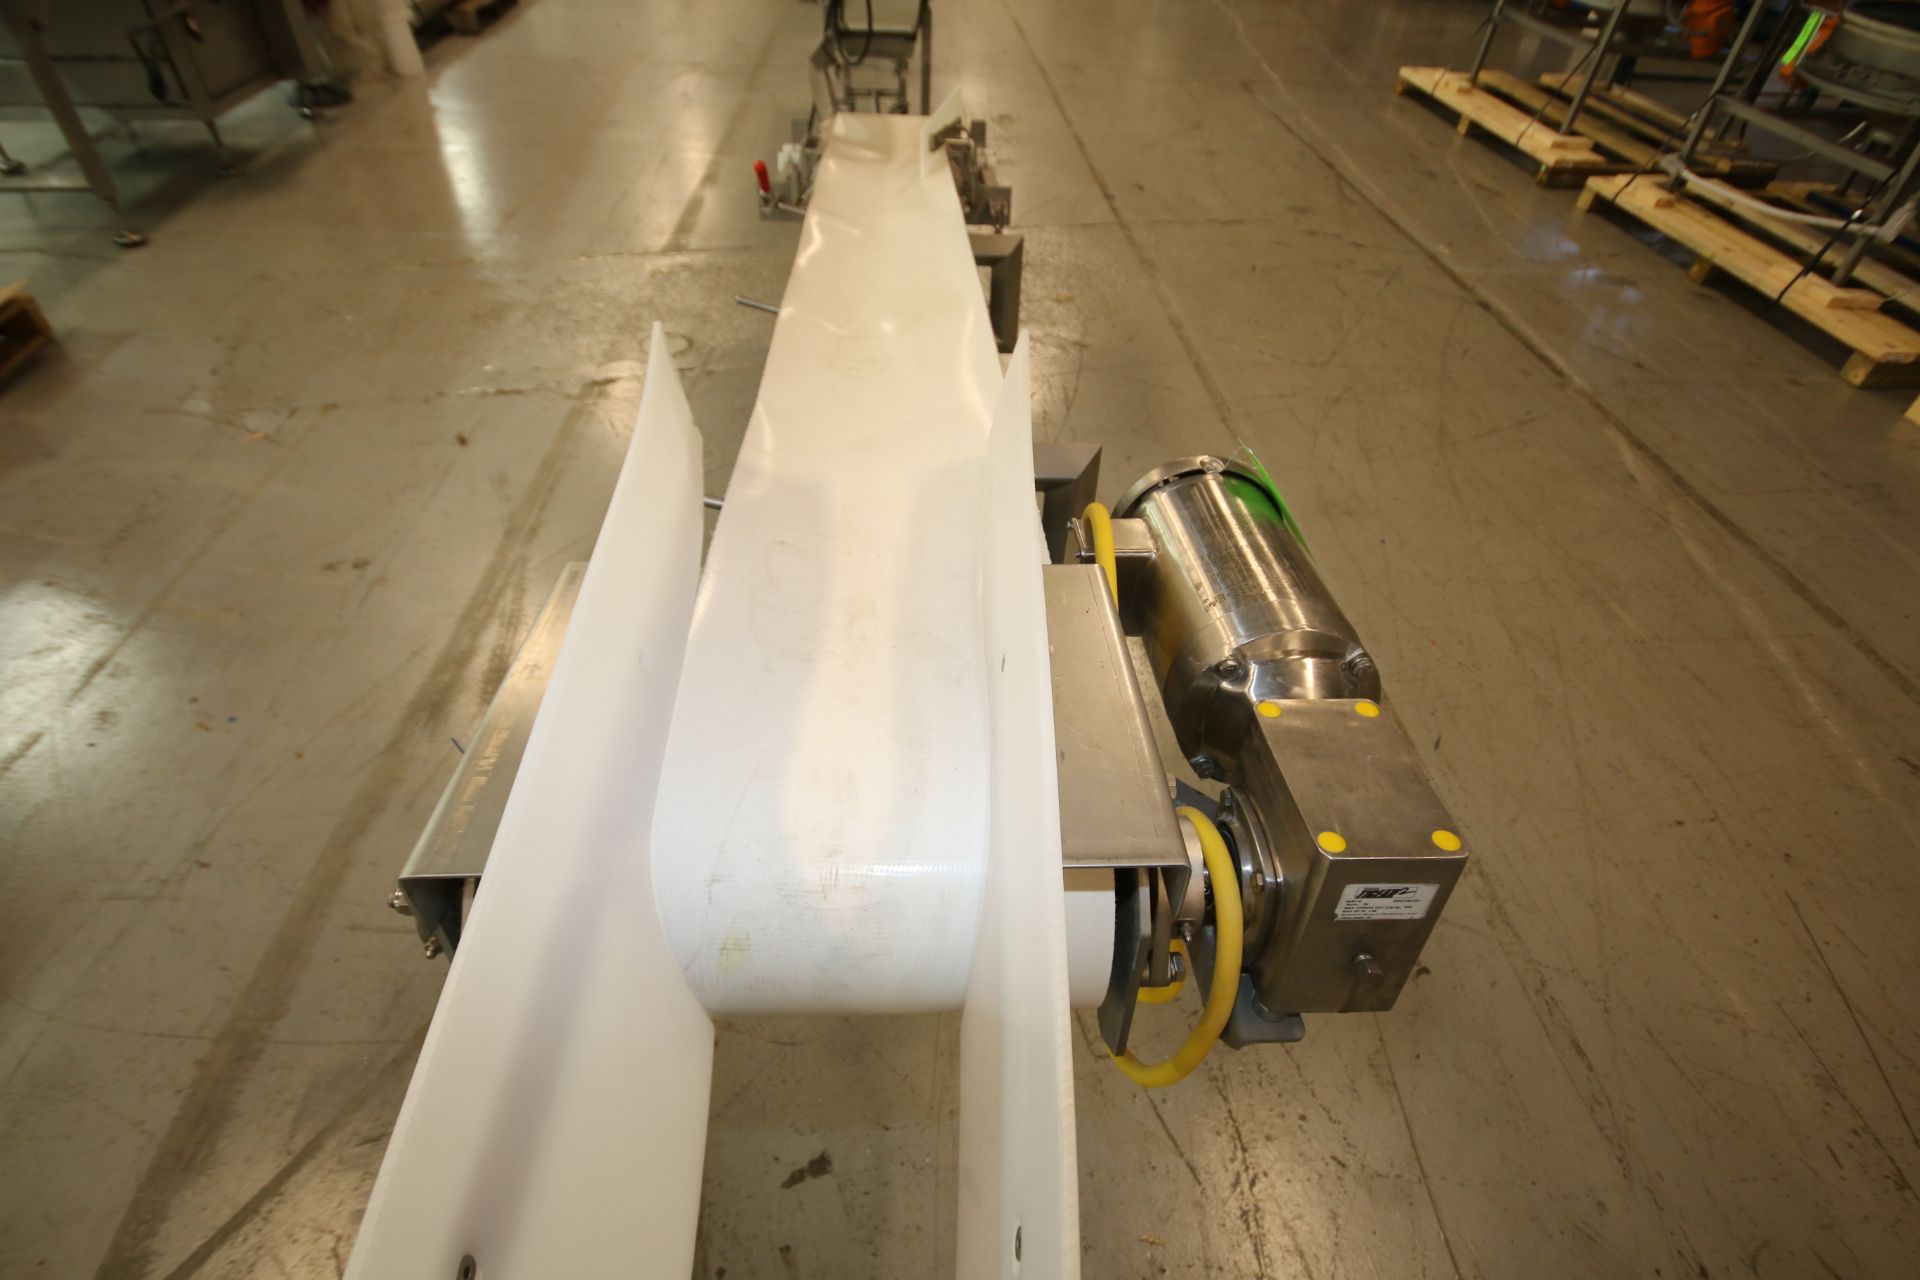 10 ft L x 12" W Portable Inclined Belt S/S Product Conveyor System, with 24" to 37" H Frame, - Image 2 of 3